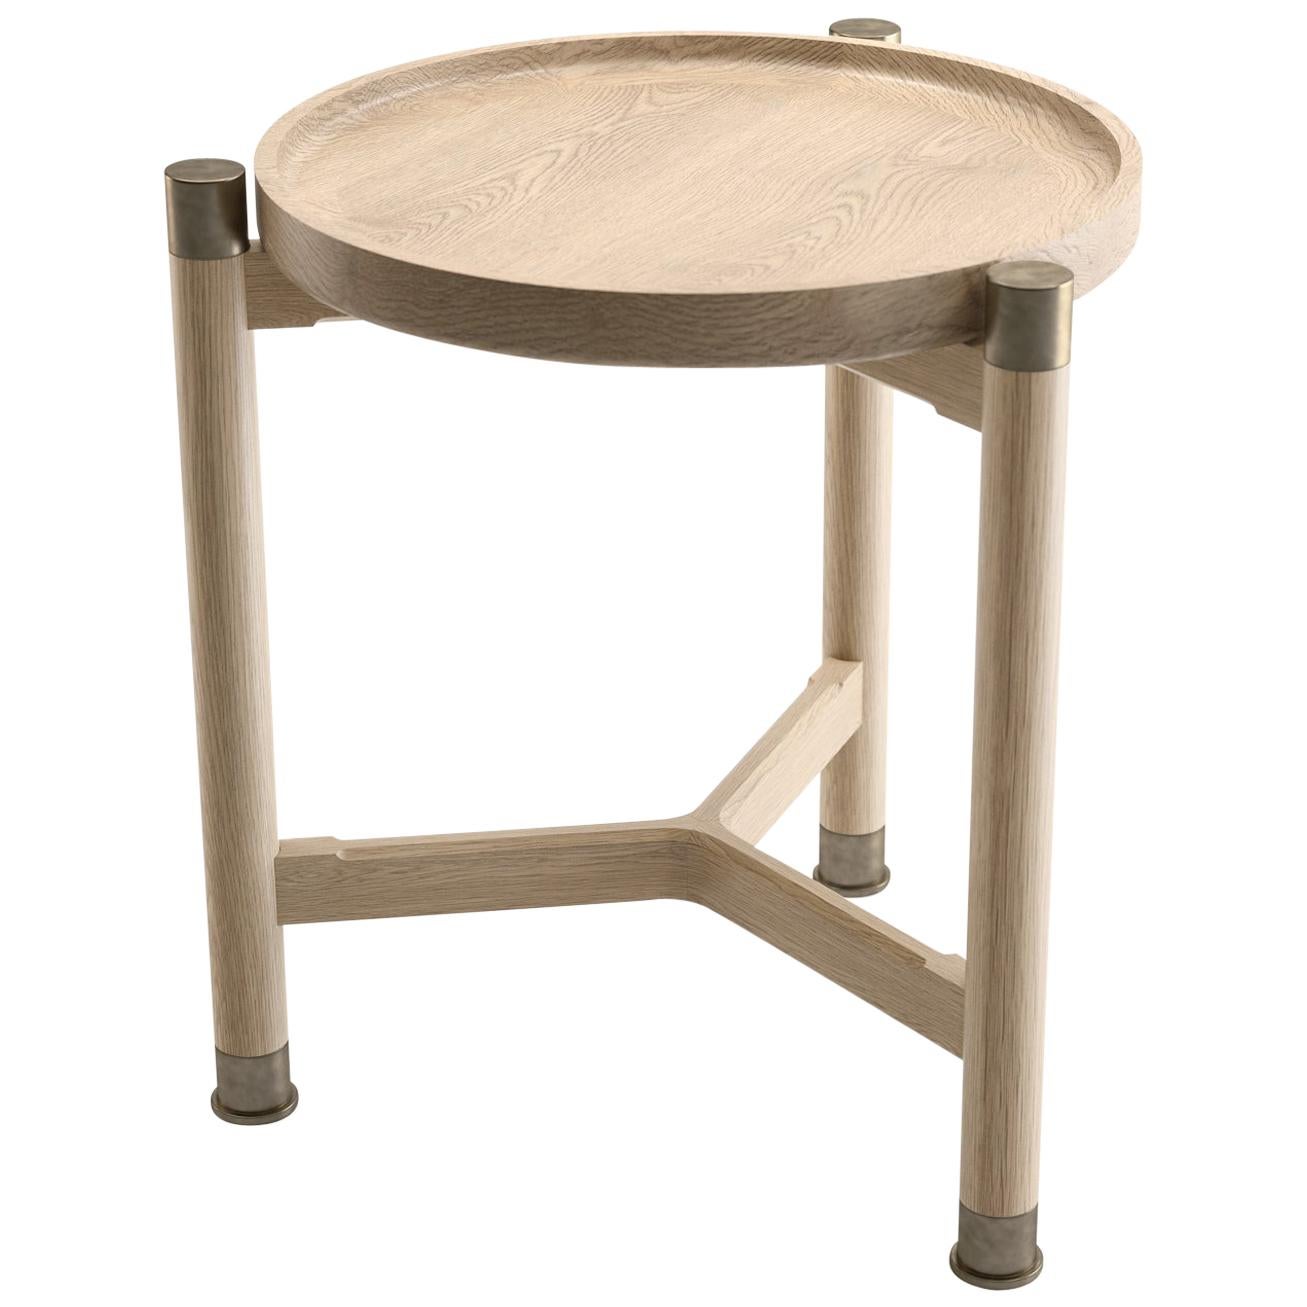 Otto Round Accent Table in Oak with Antique Brass Fittings